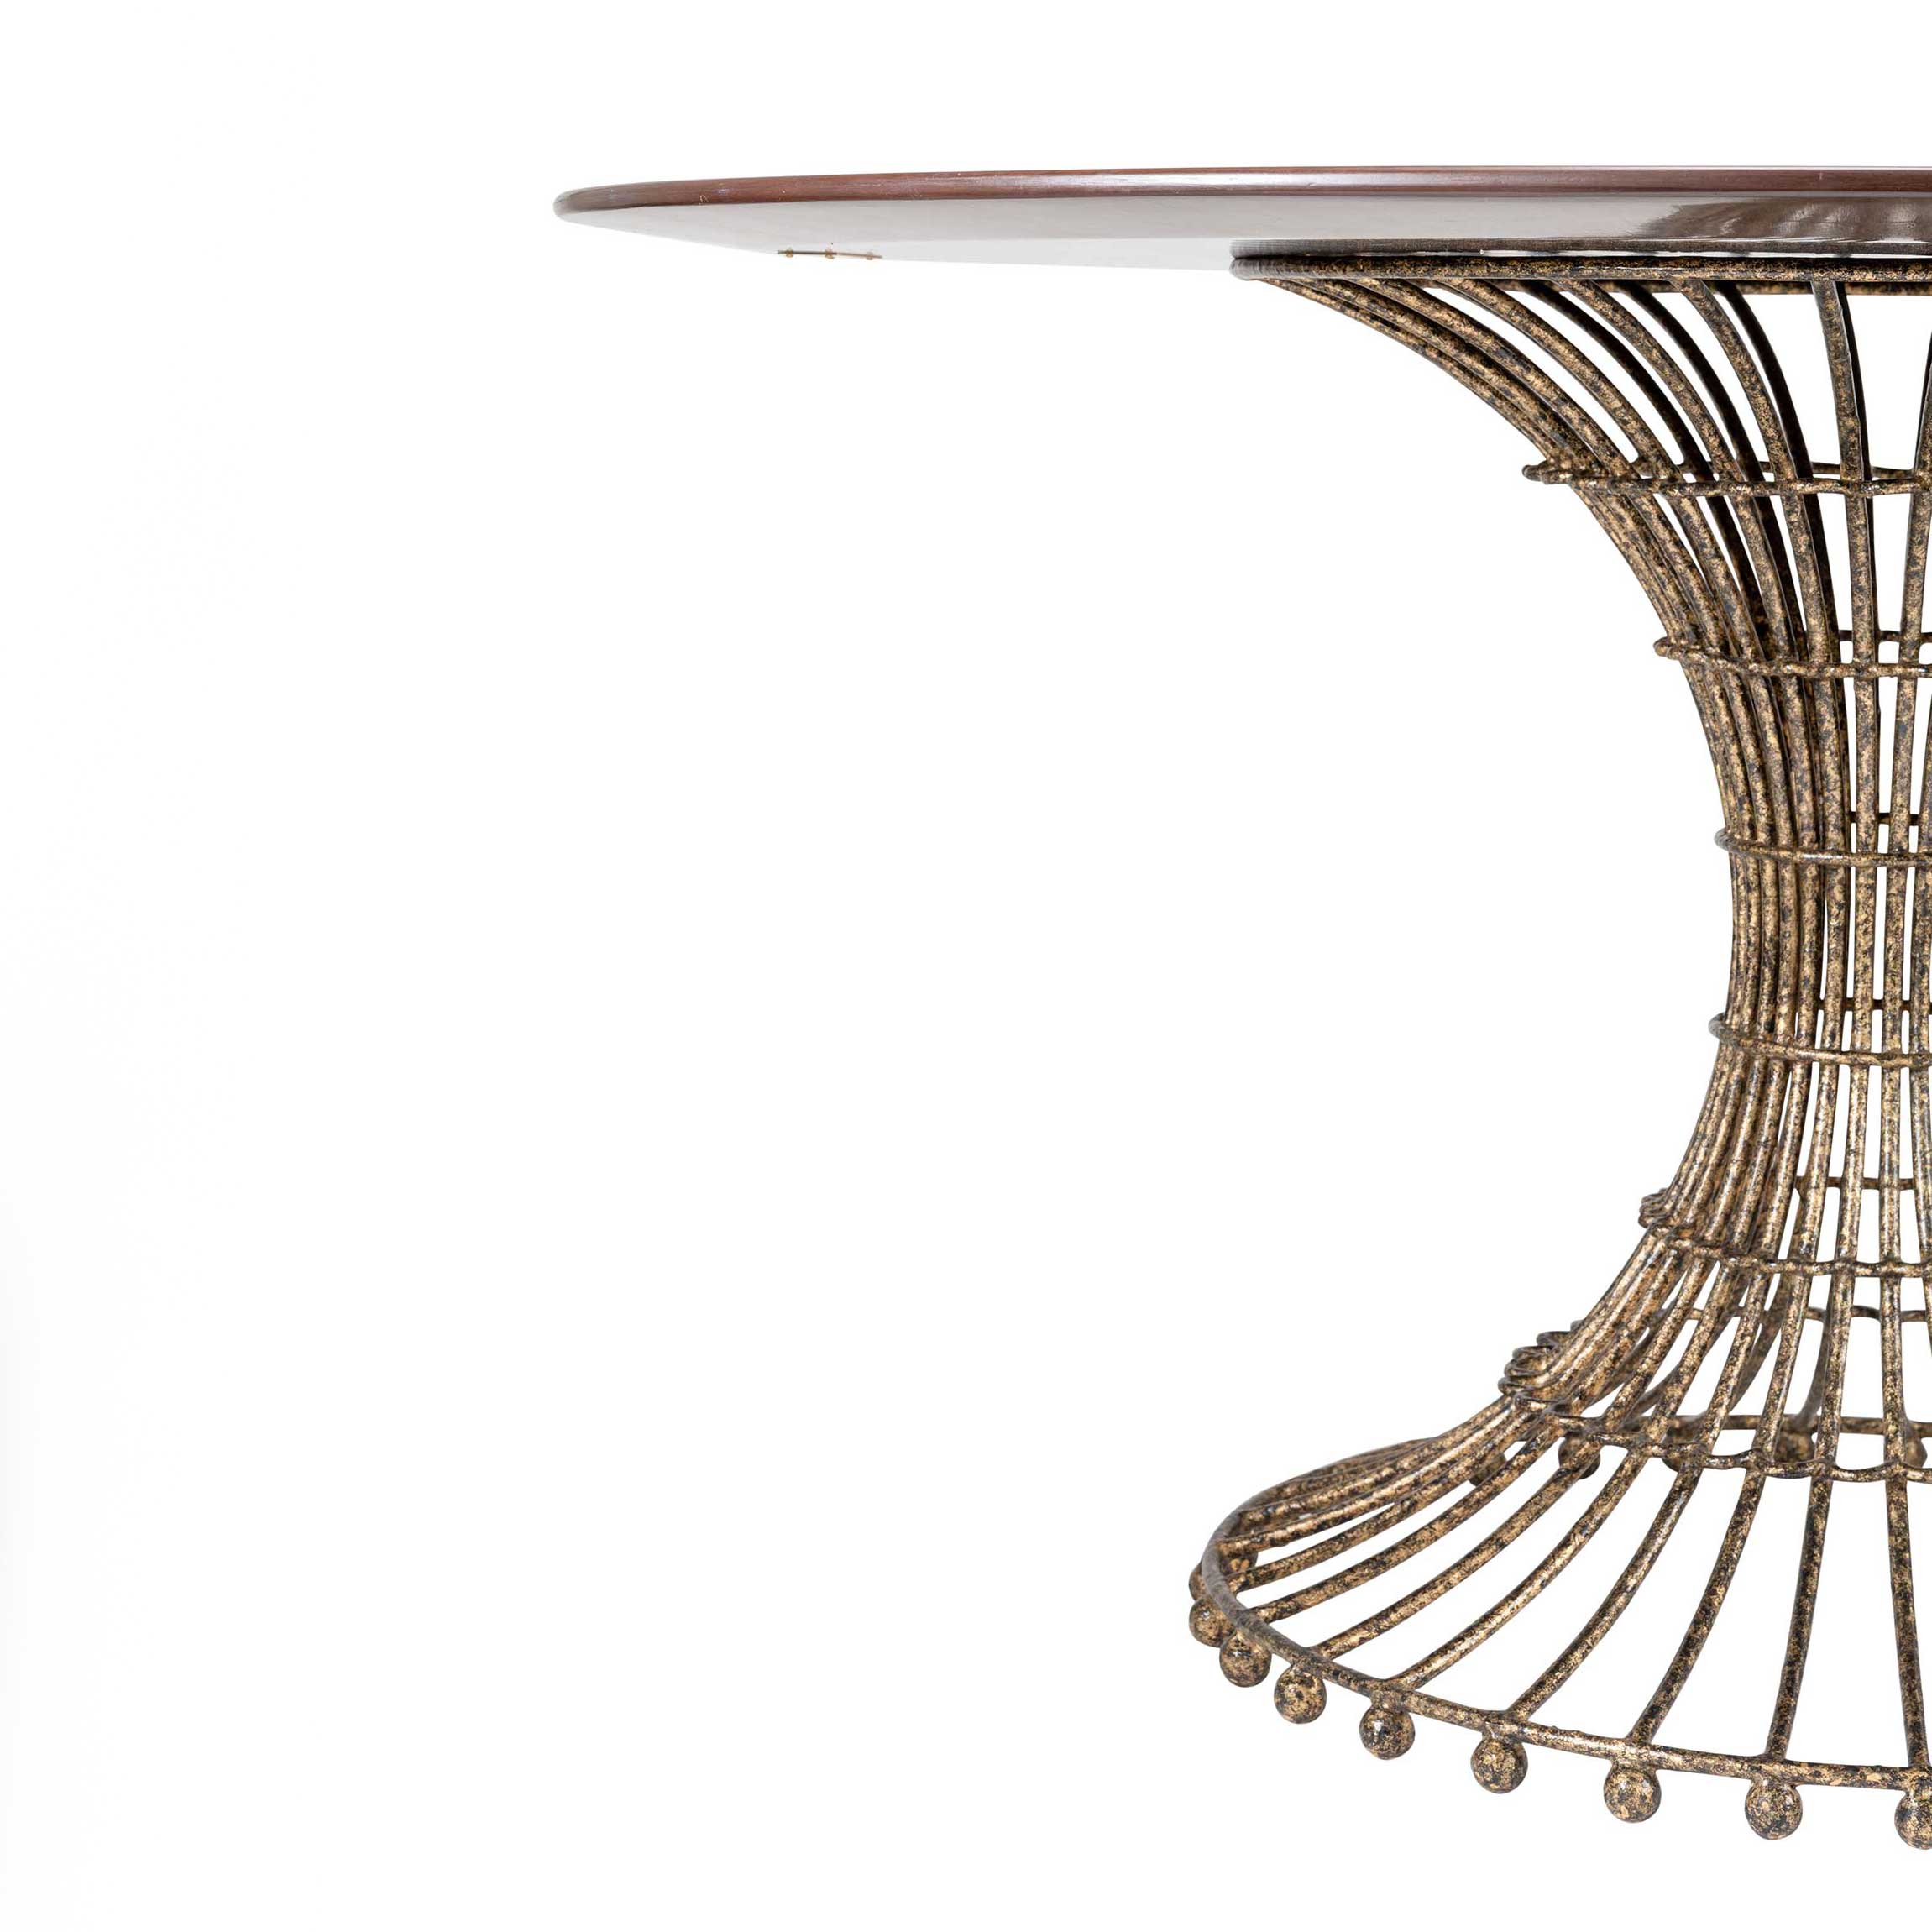 Gilded-Cage-Dining-Table_Antique-Gold-and-Medium-Walnut_DSC03165-Editar_FULL_clip